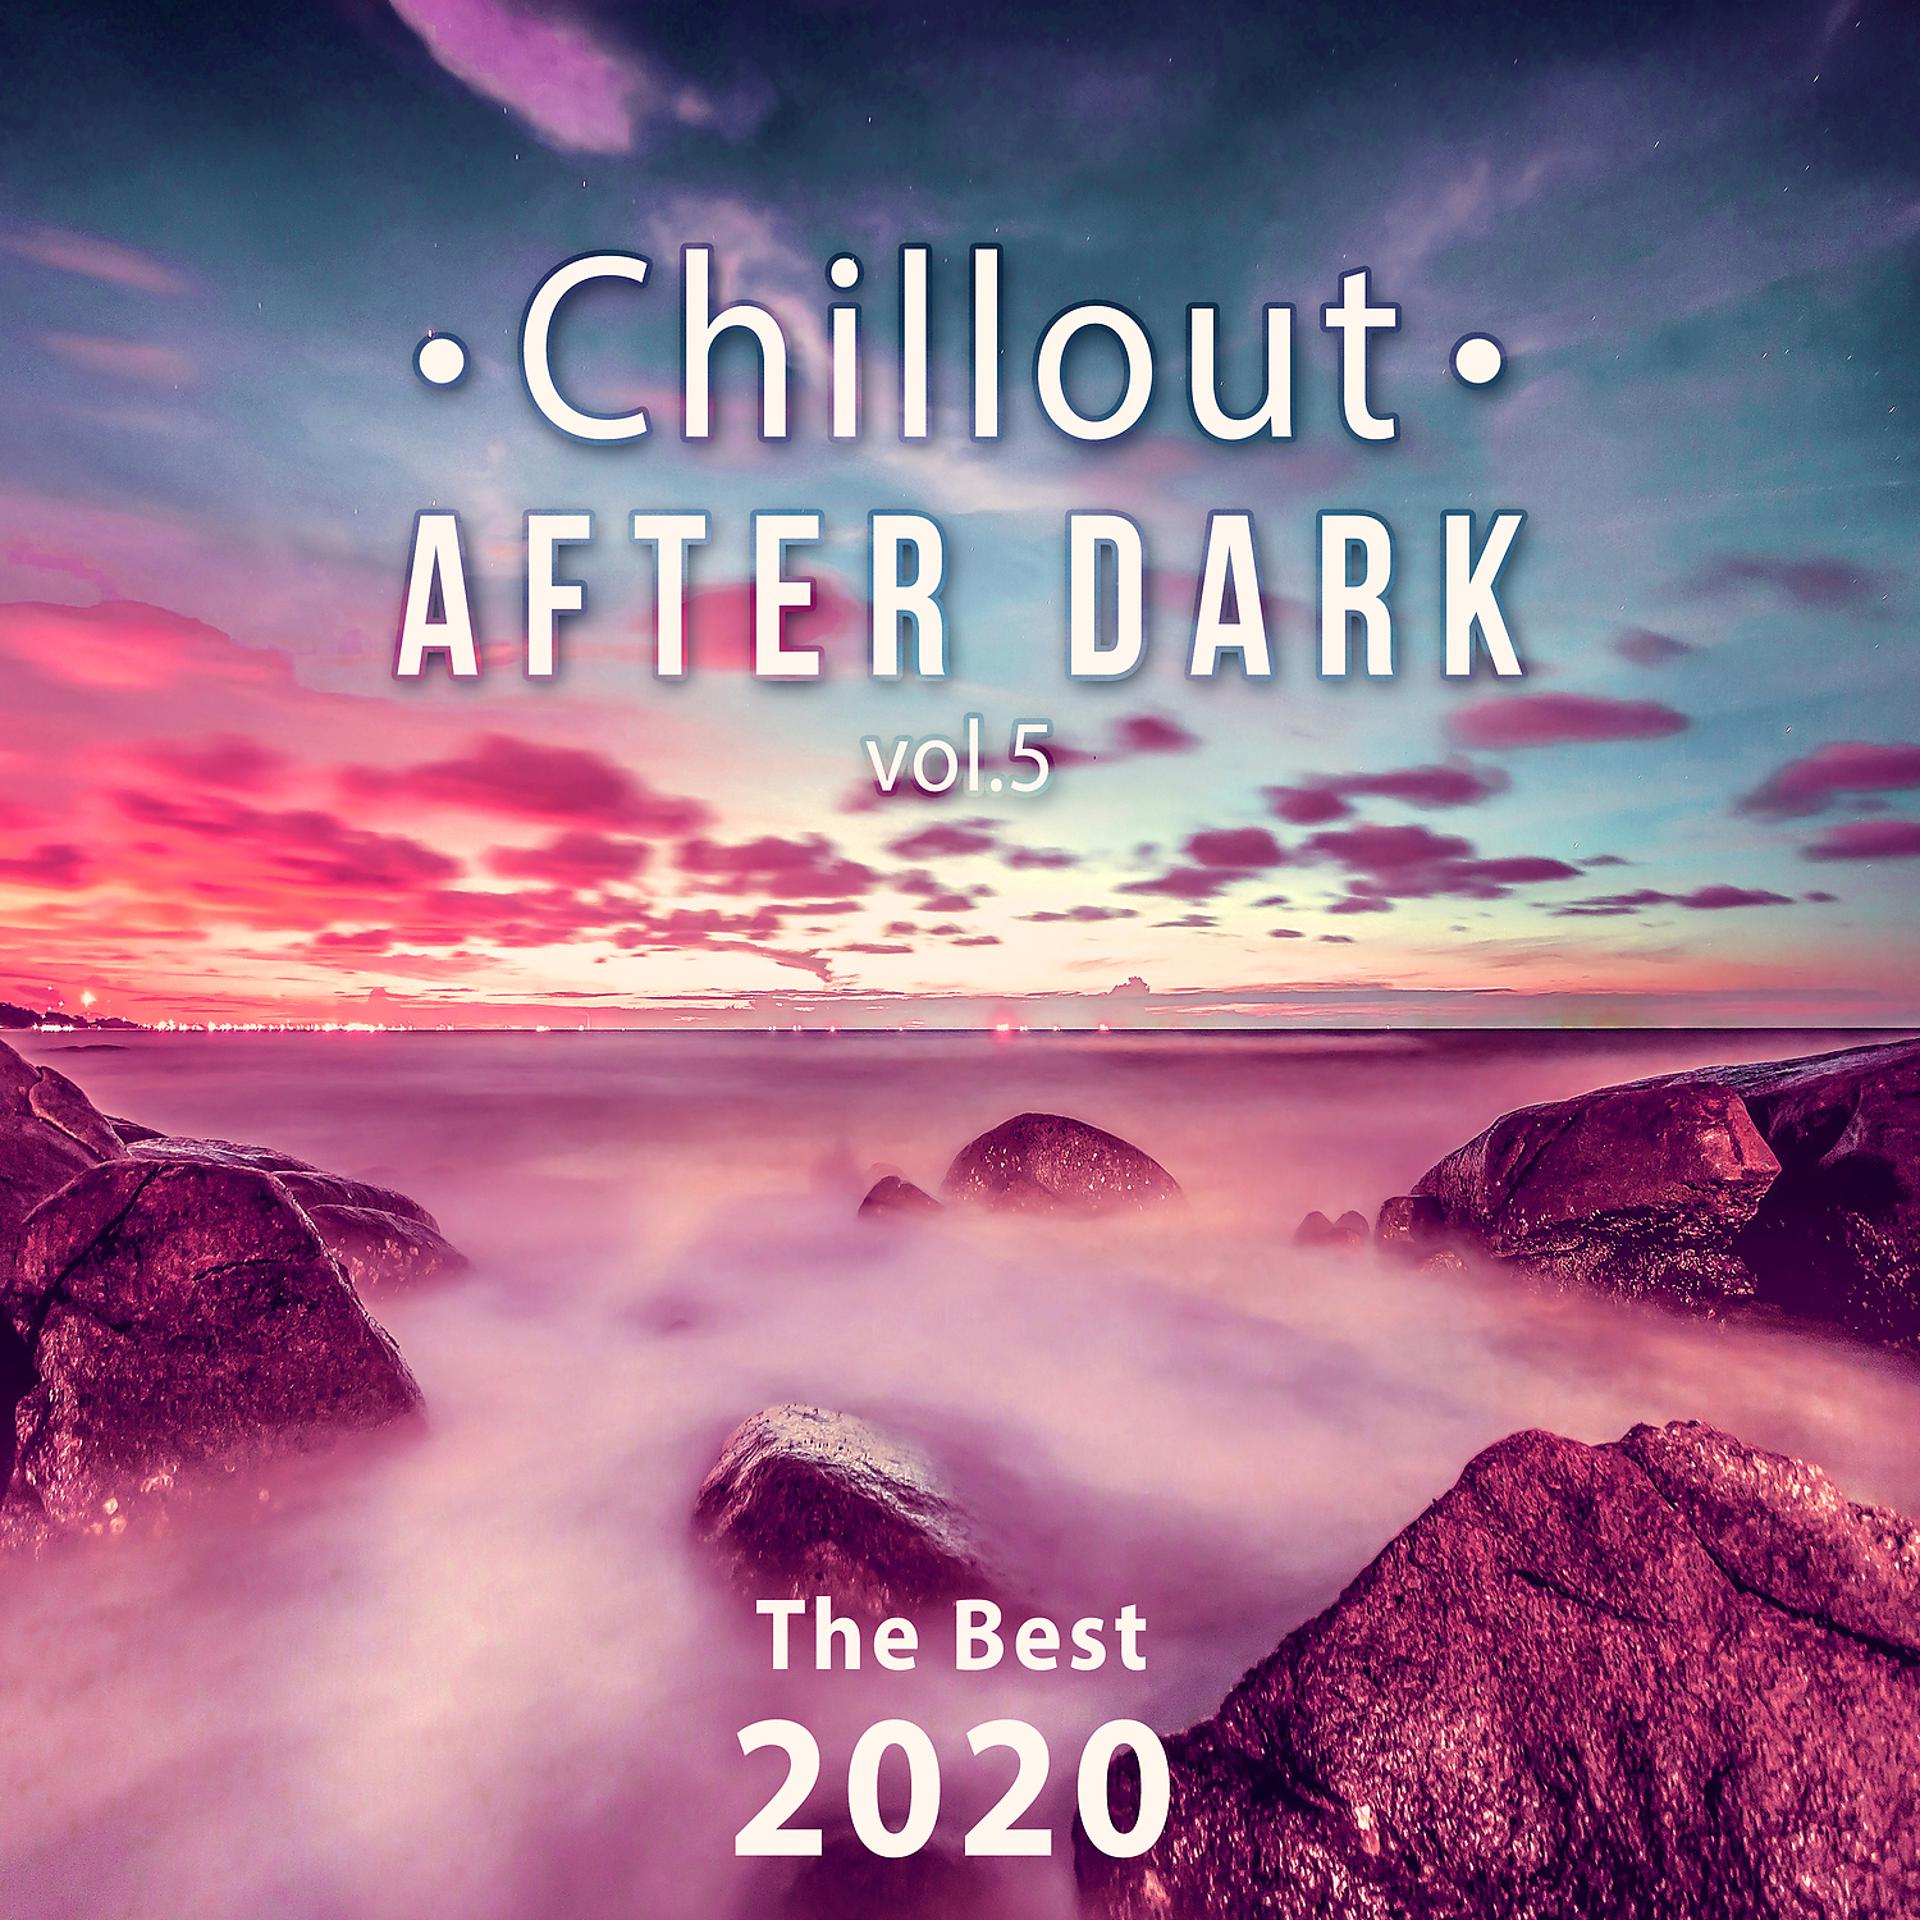 Постер альбома Chillout After Dark Vol. 5: The Best 2020 Playlist, Relax on the Beach, Ibiza Party Lounge, Cafe Relaxation, Bali Chill Out, Music del Mar, Bar Background Music Summer Time Hits